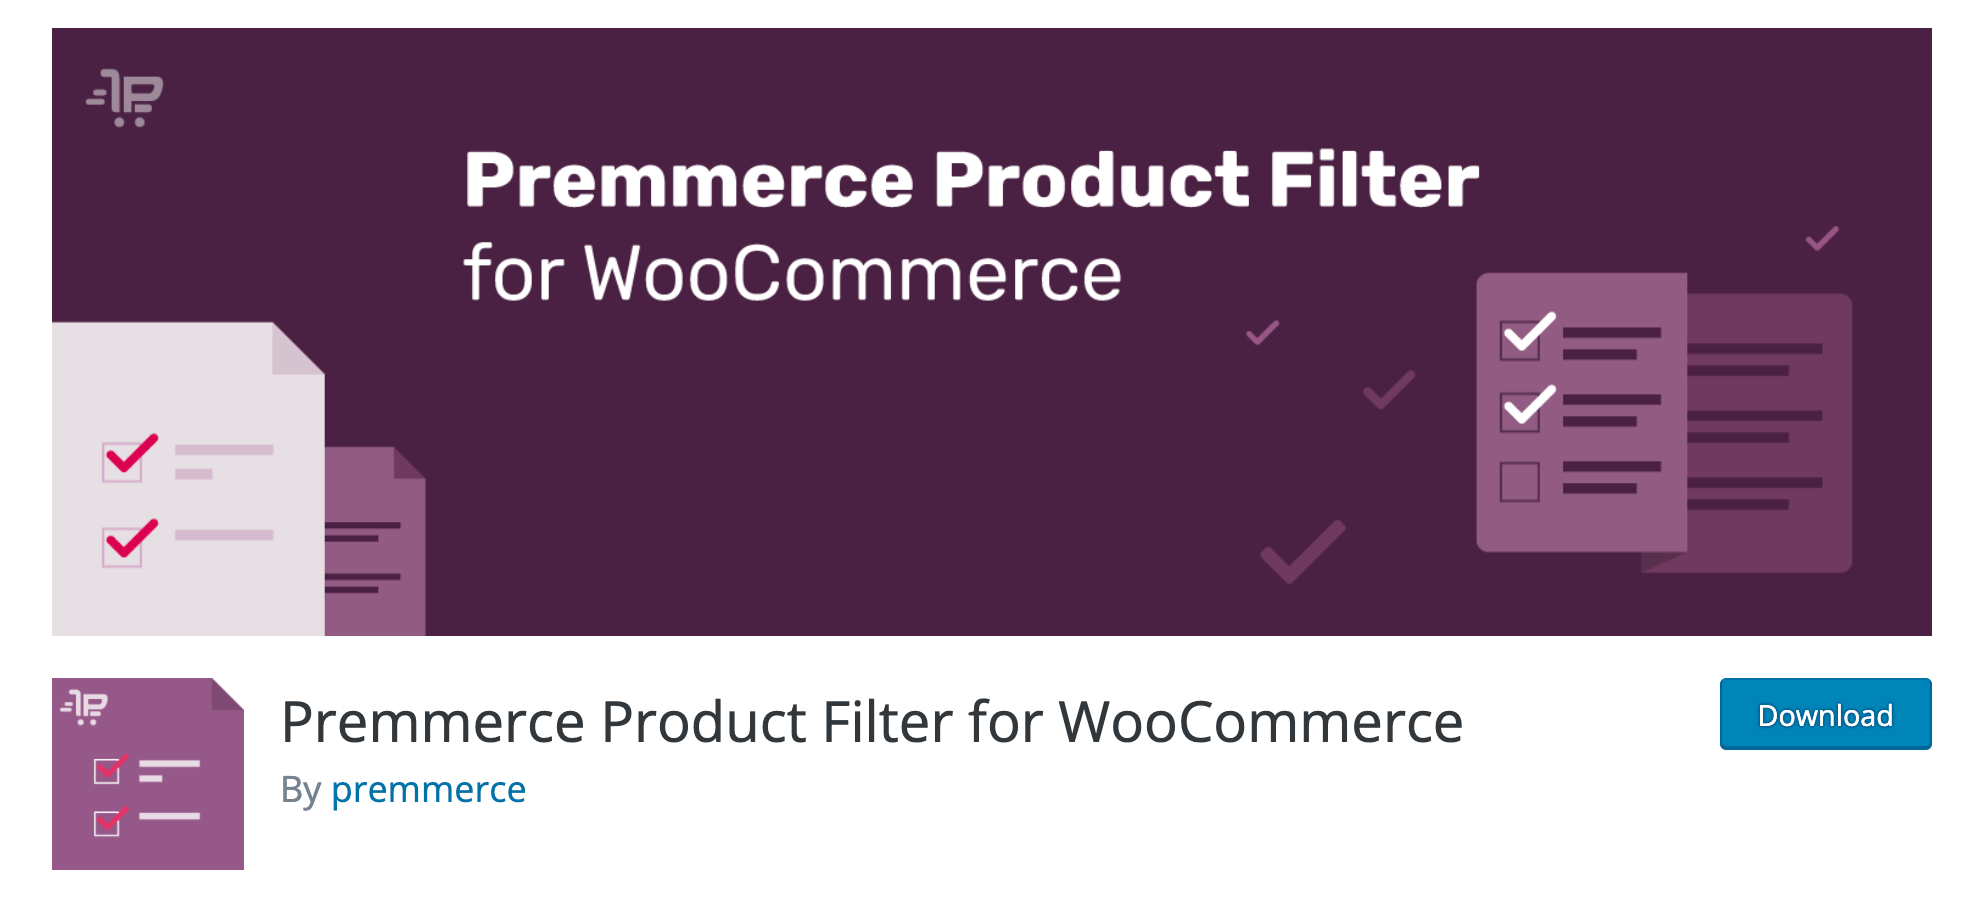 It also works well with WooCommerce, which is a plus.